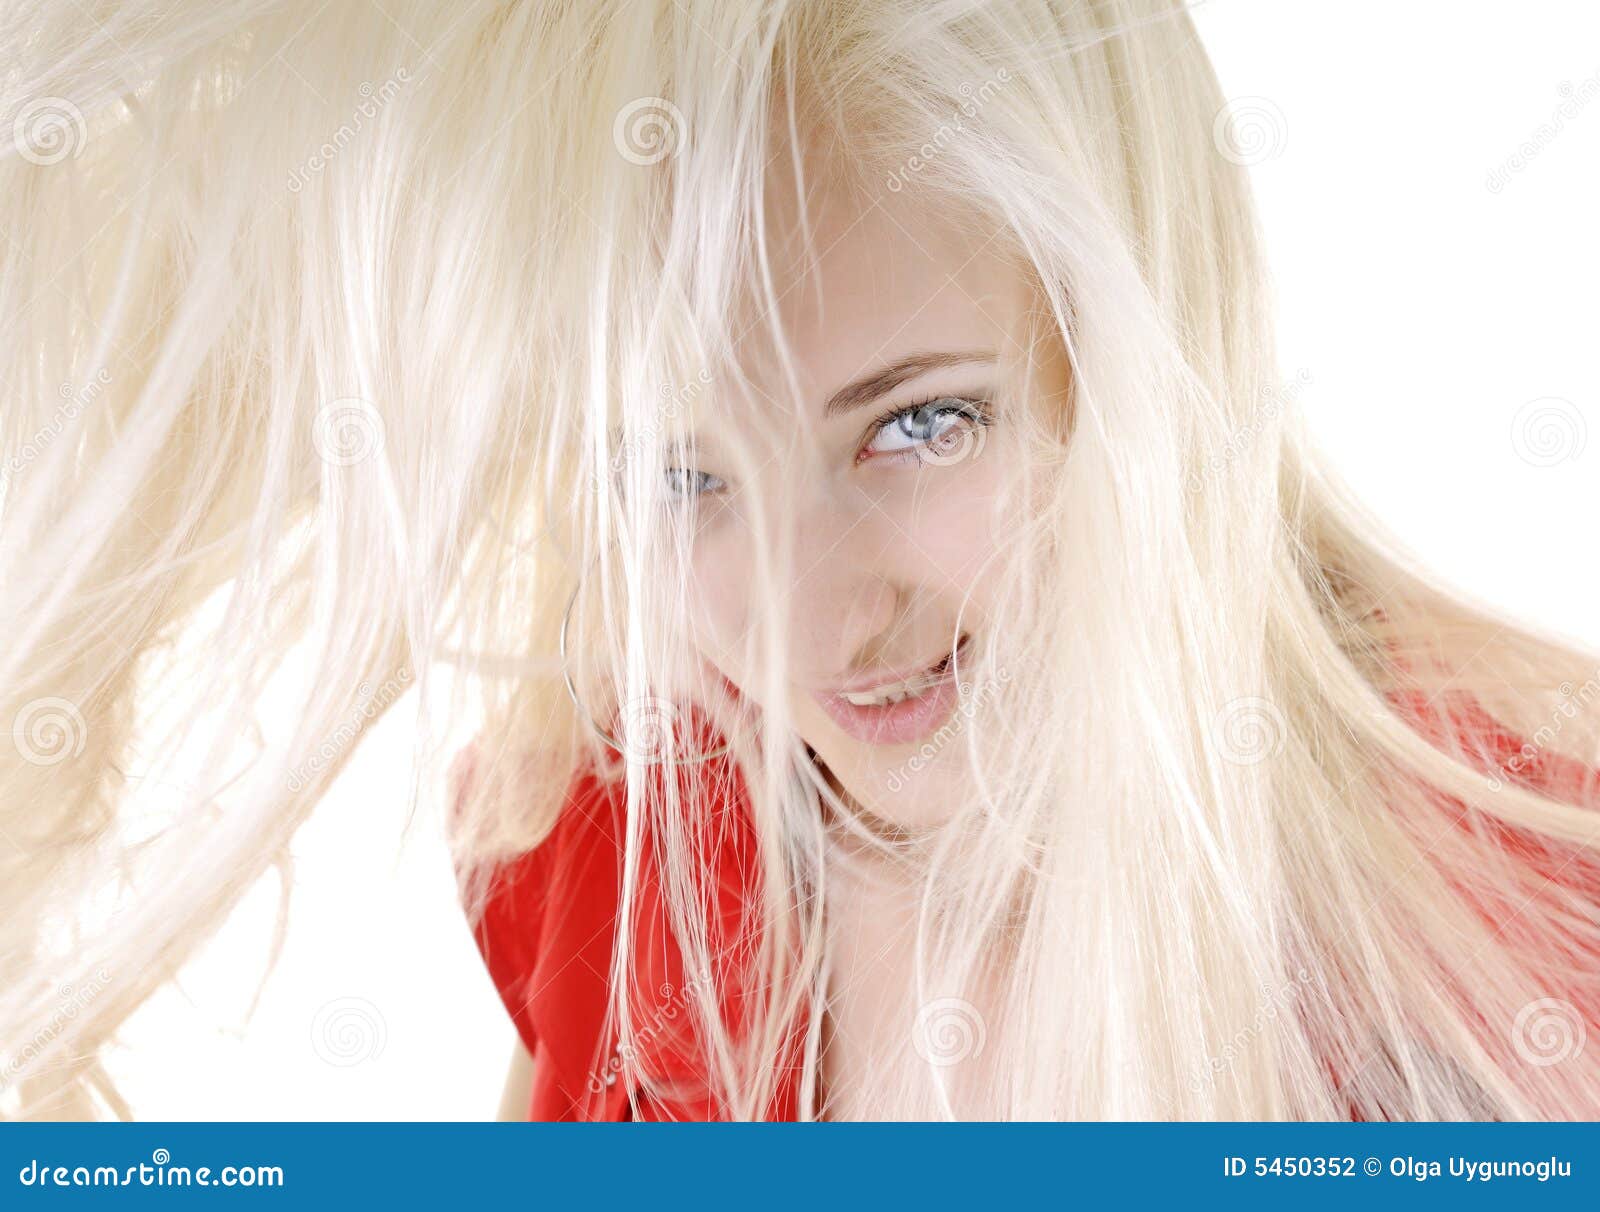 Long white hair with girls Stringy